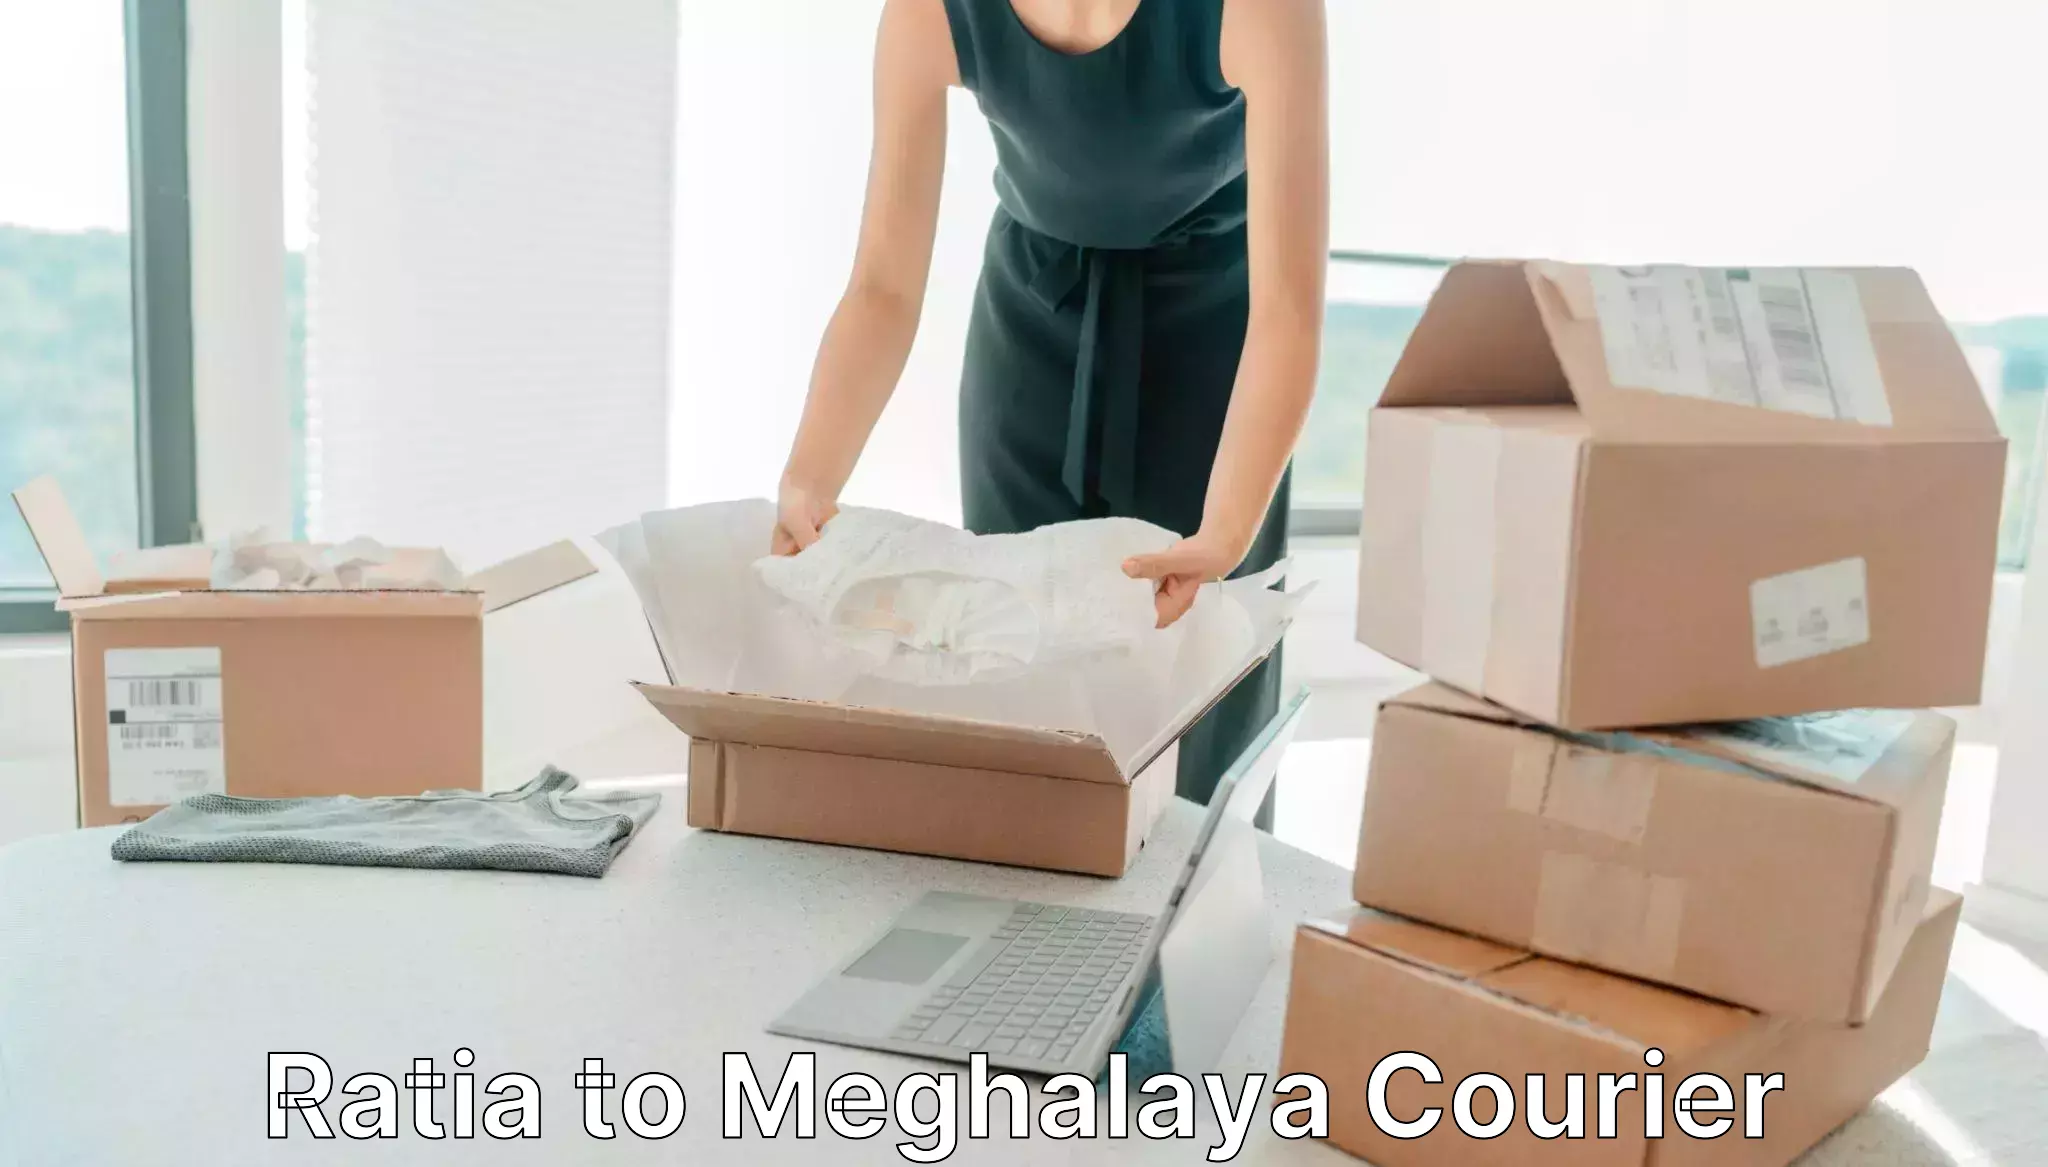 Easy access courier services Ratia to Meghalaya